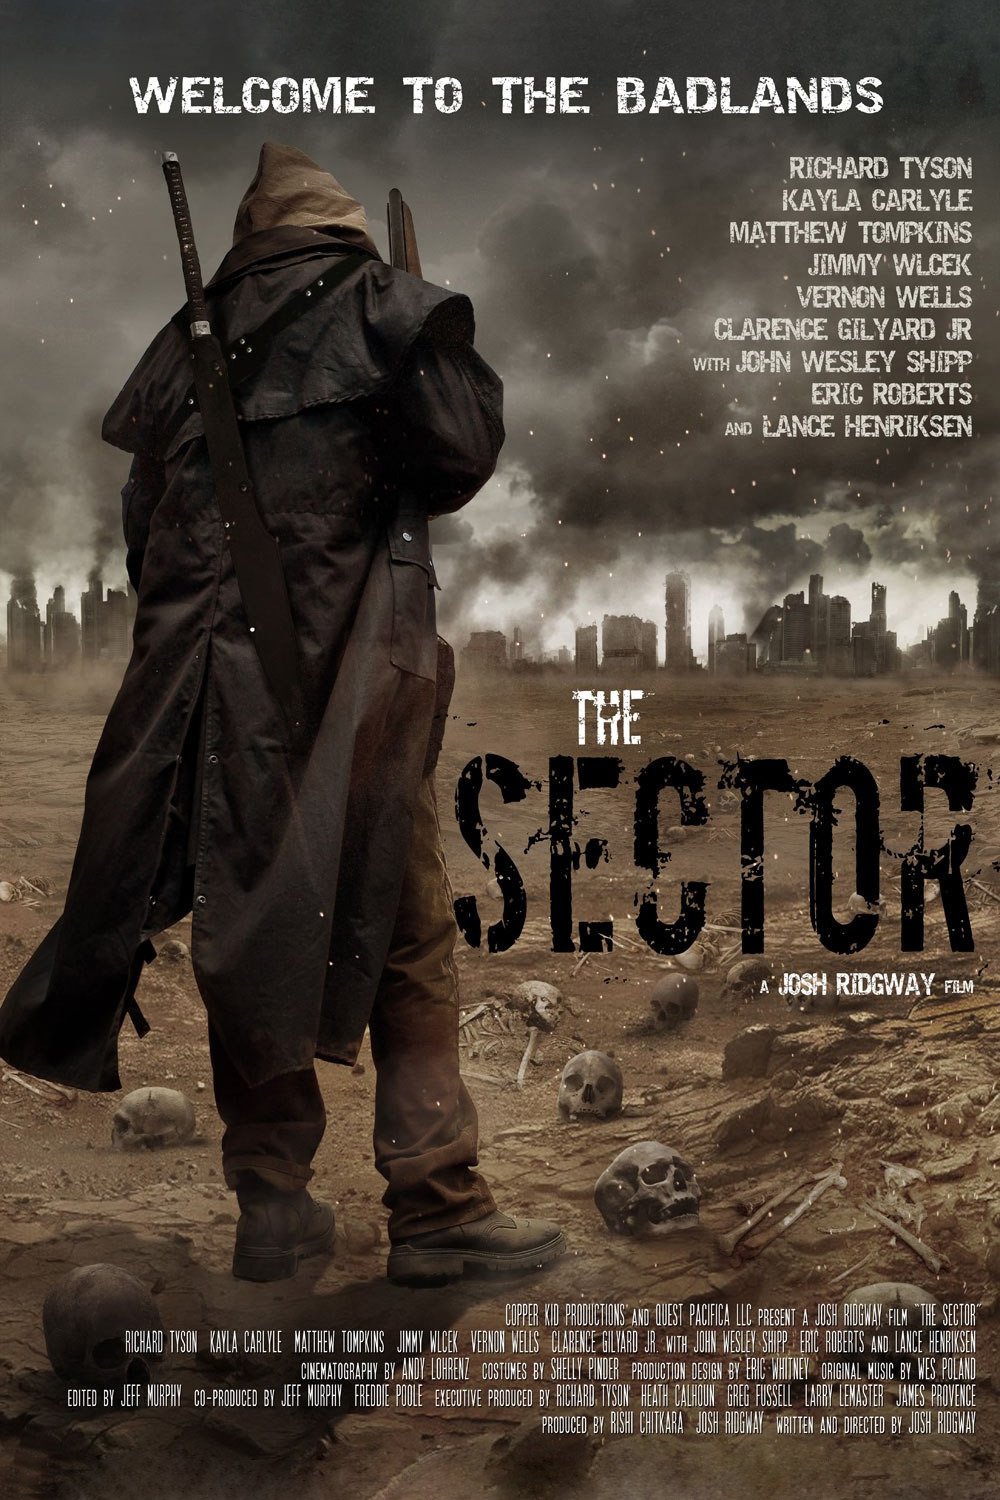 The Sector Poster